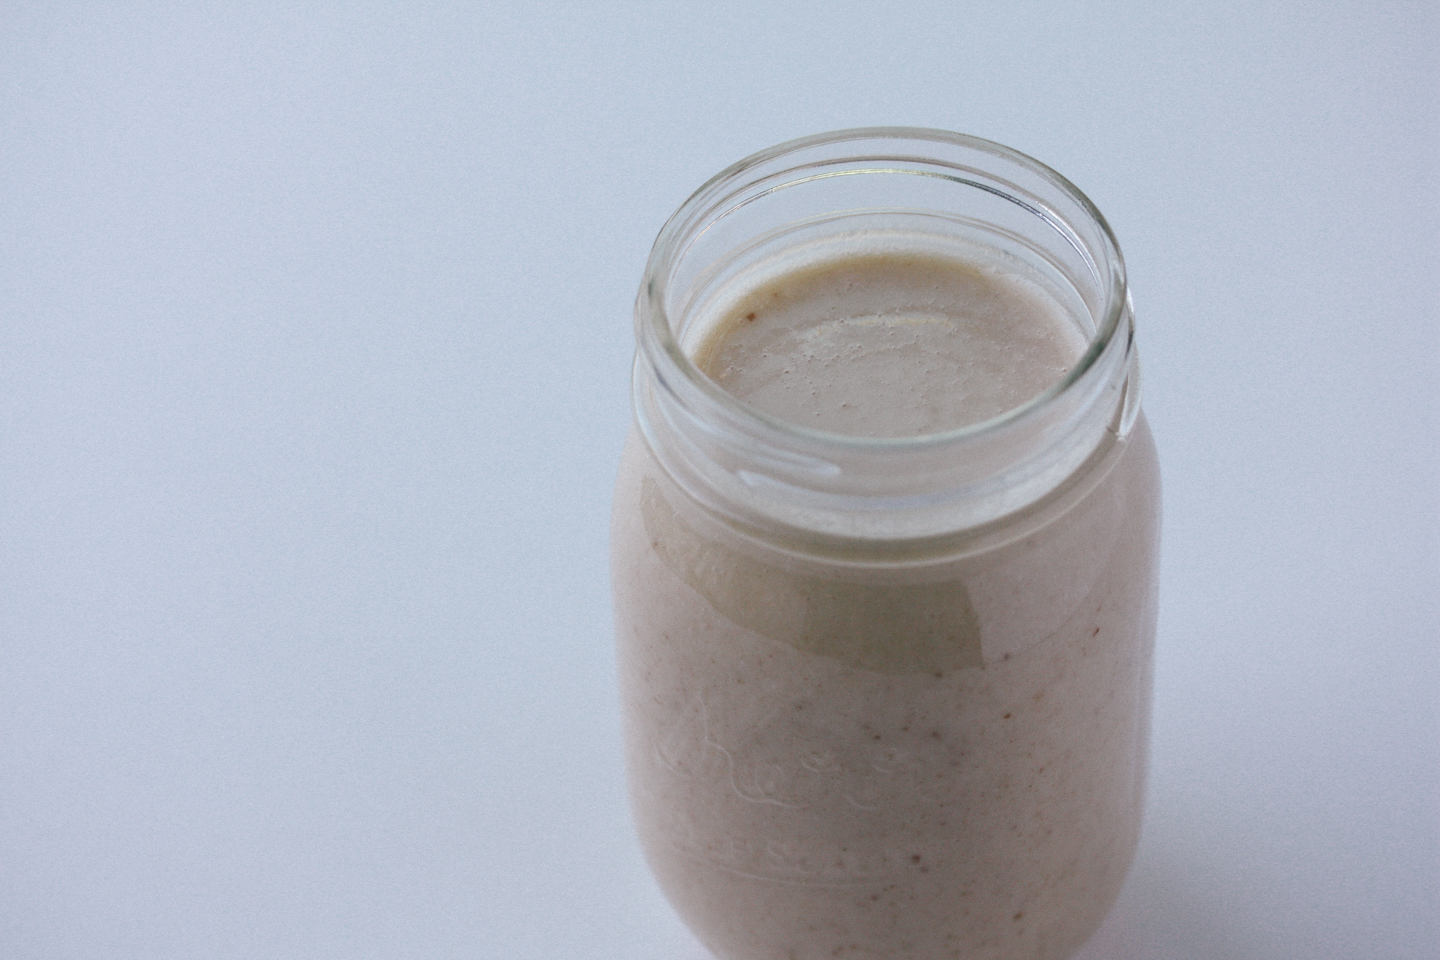 Once it's blended to your liking, transfer it to a mason jar and enjoy by the spoonful!